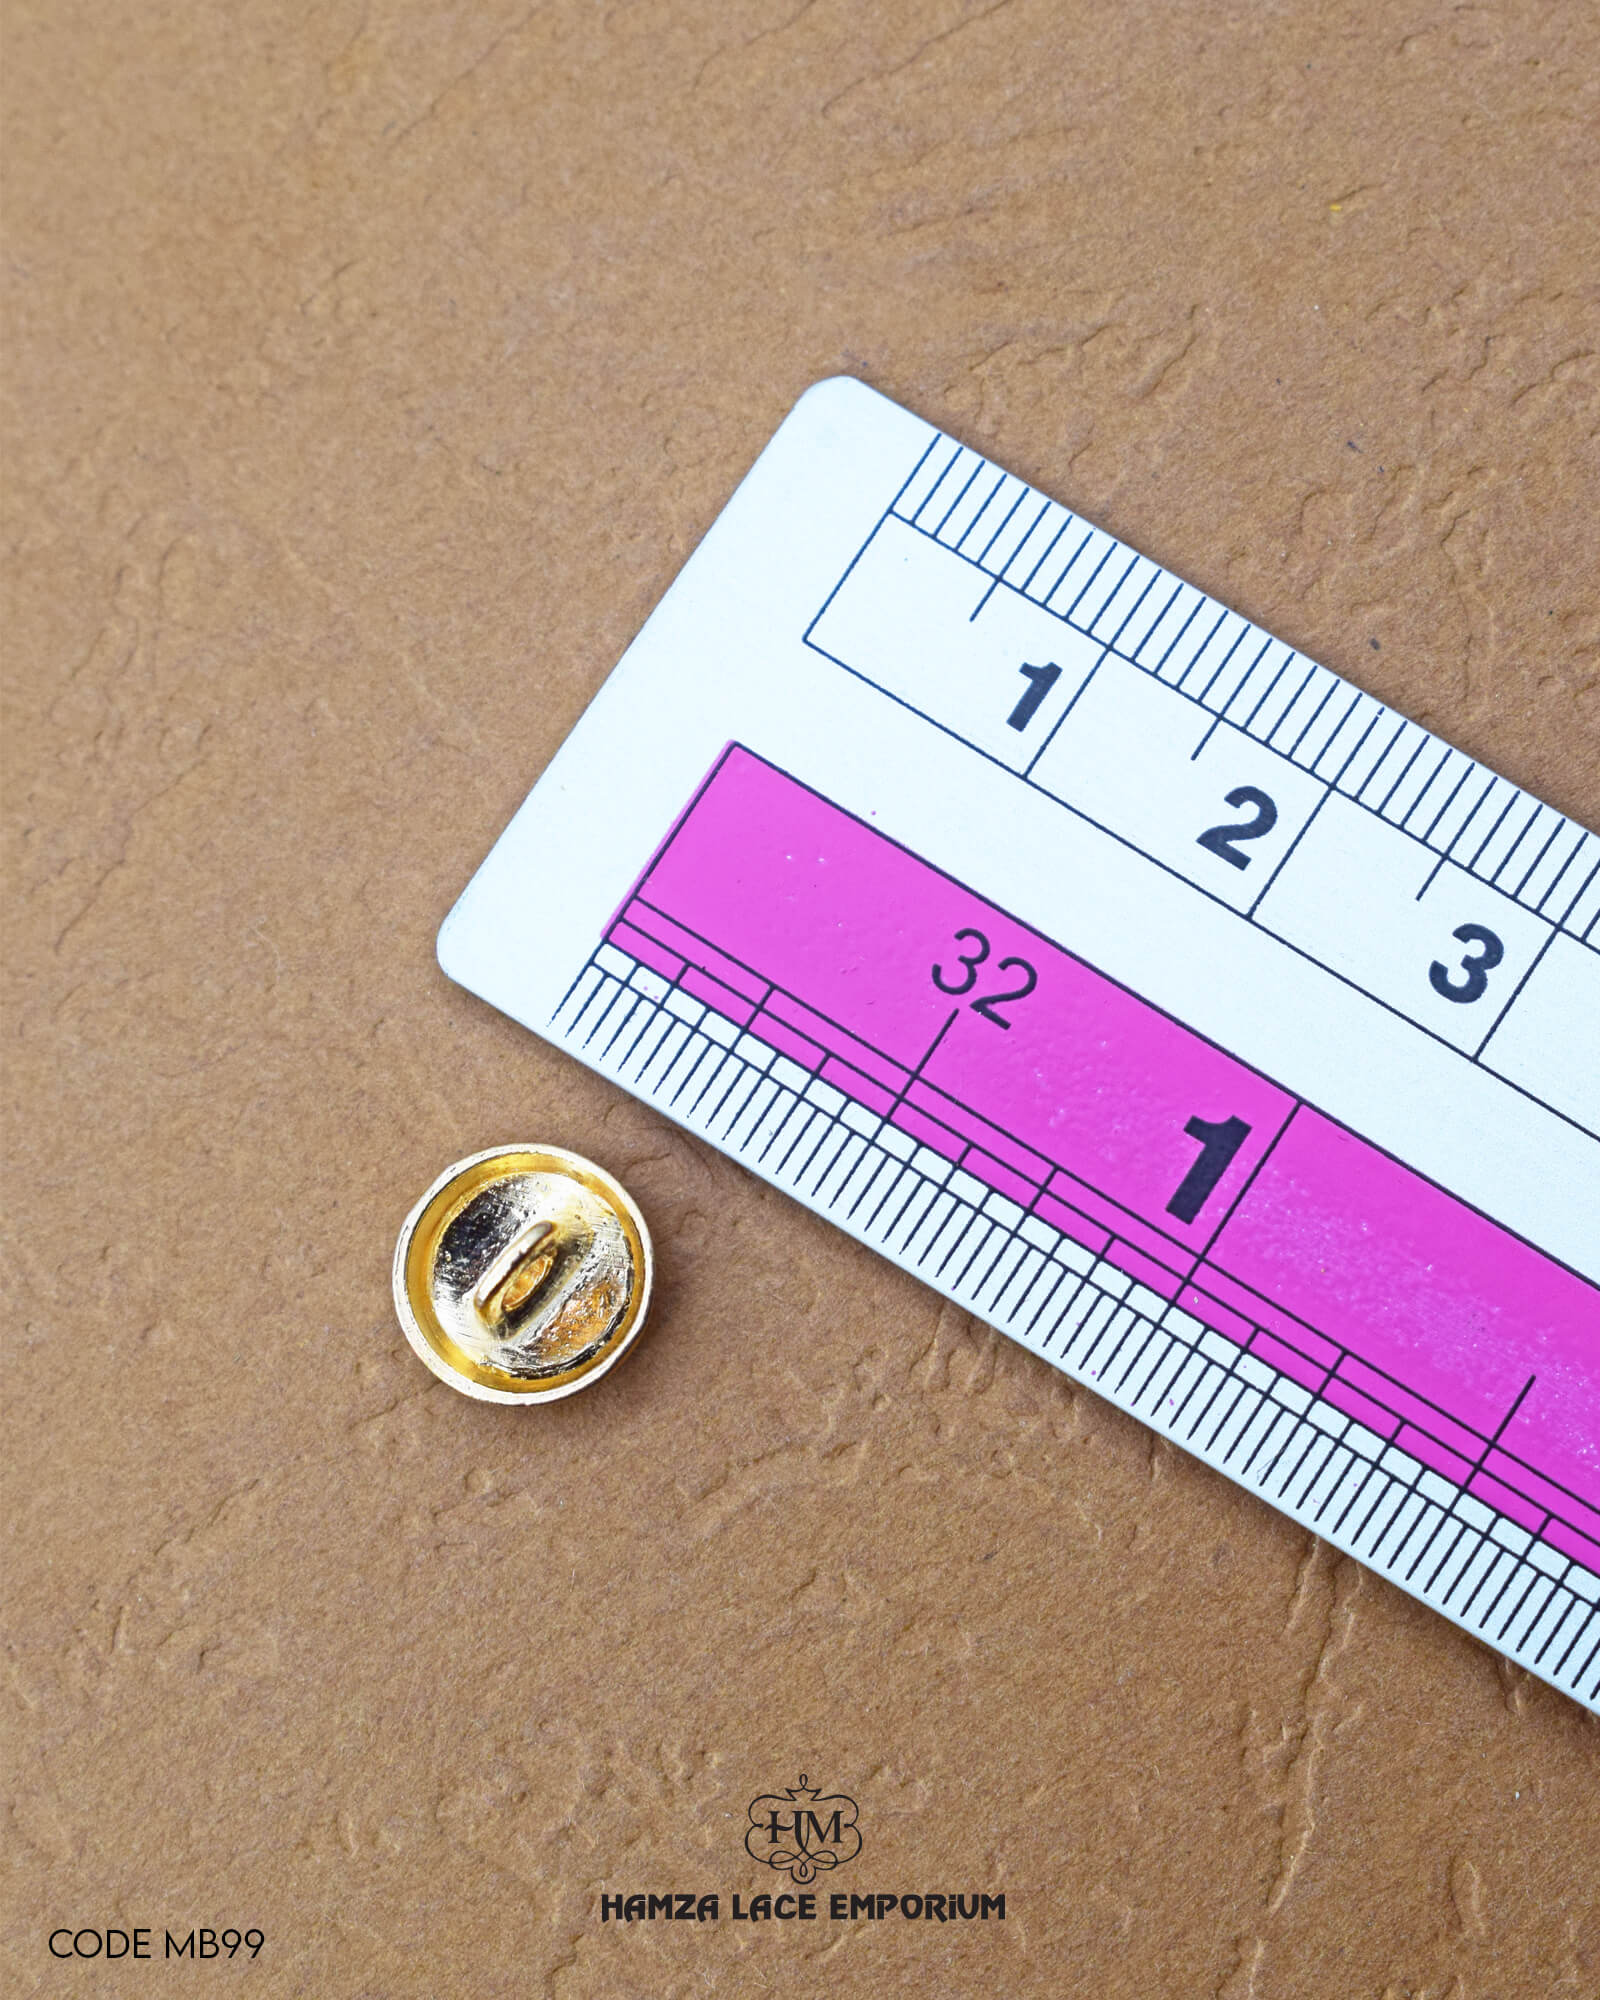 The size of the 'Golden Metal Button MB99' is measured using a ruler.